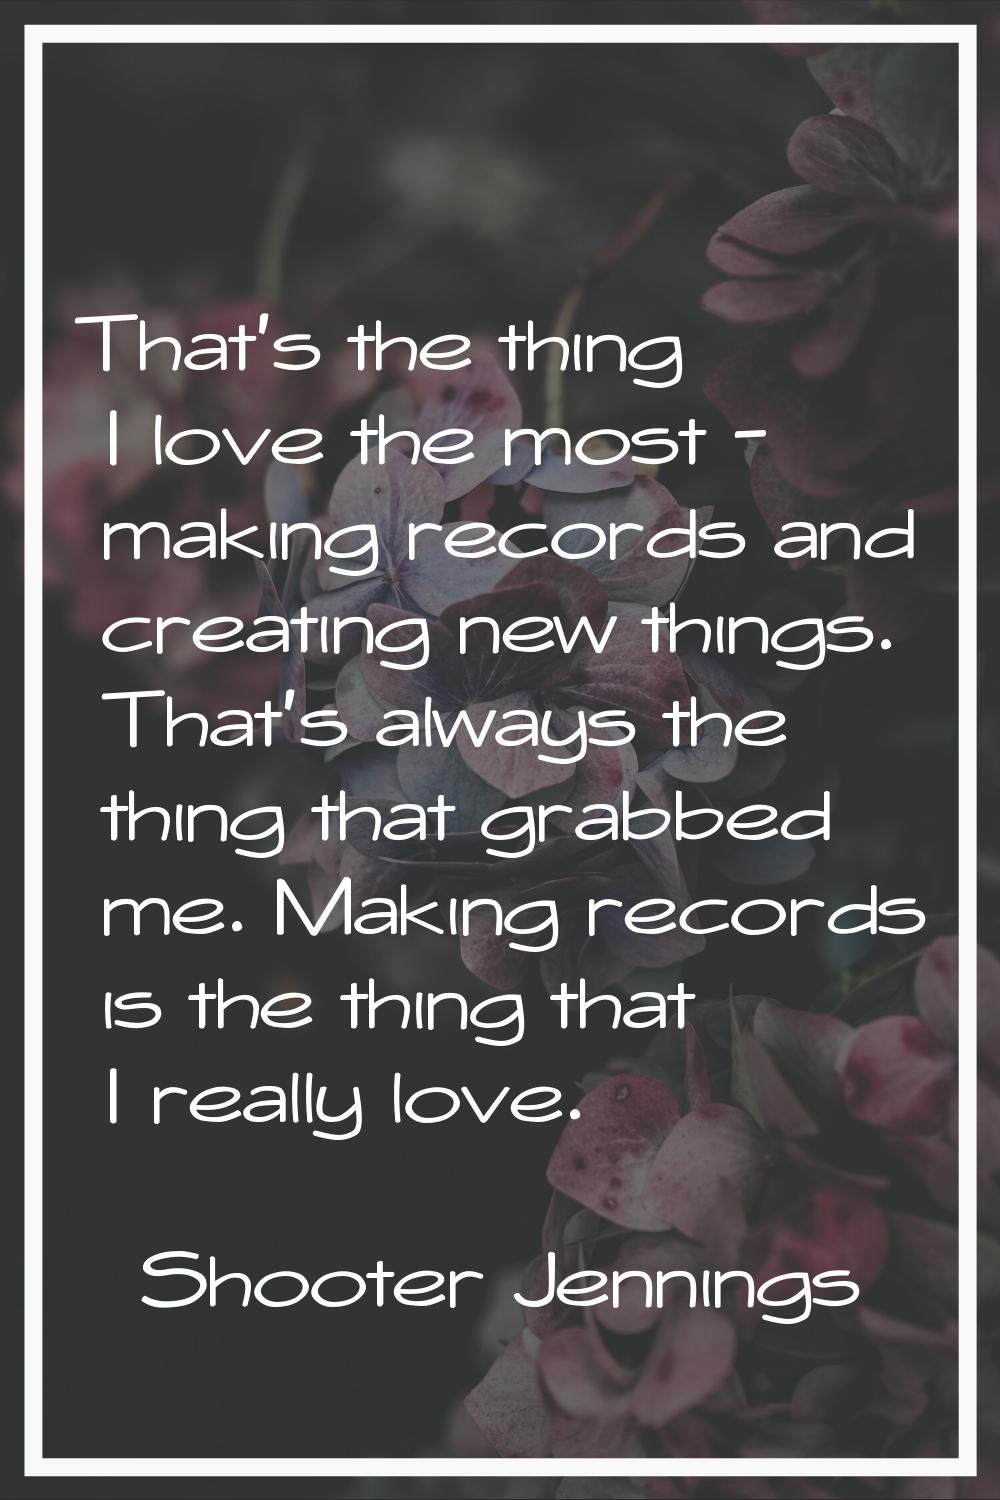 That's the thing I love the most - making records and creating new things. That's always the thing 